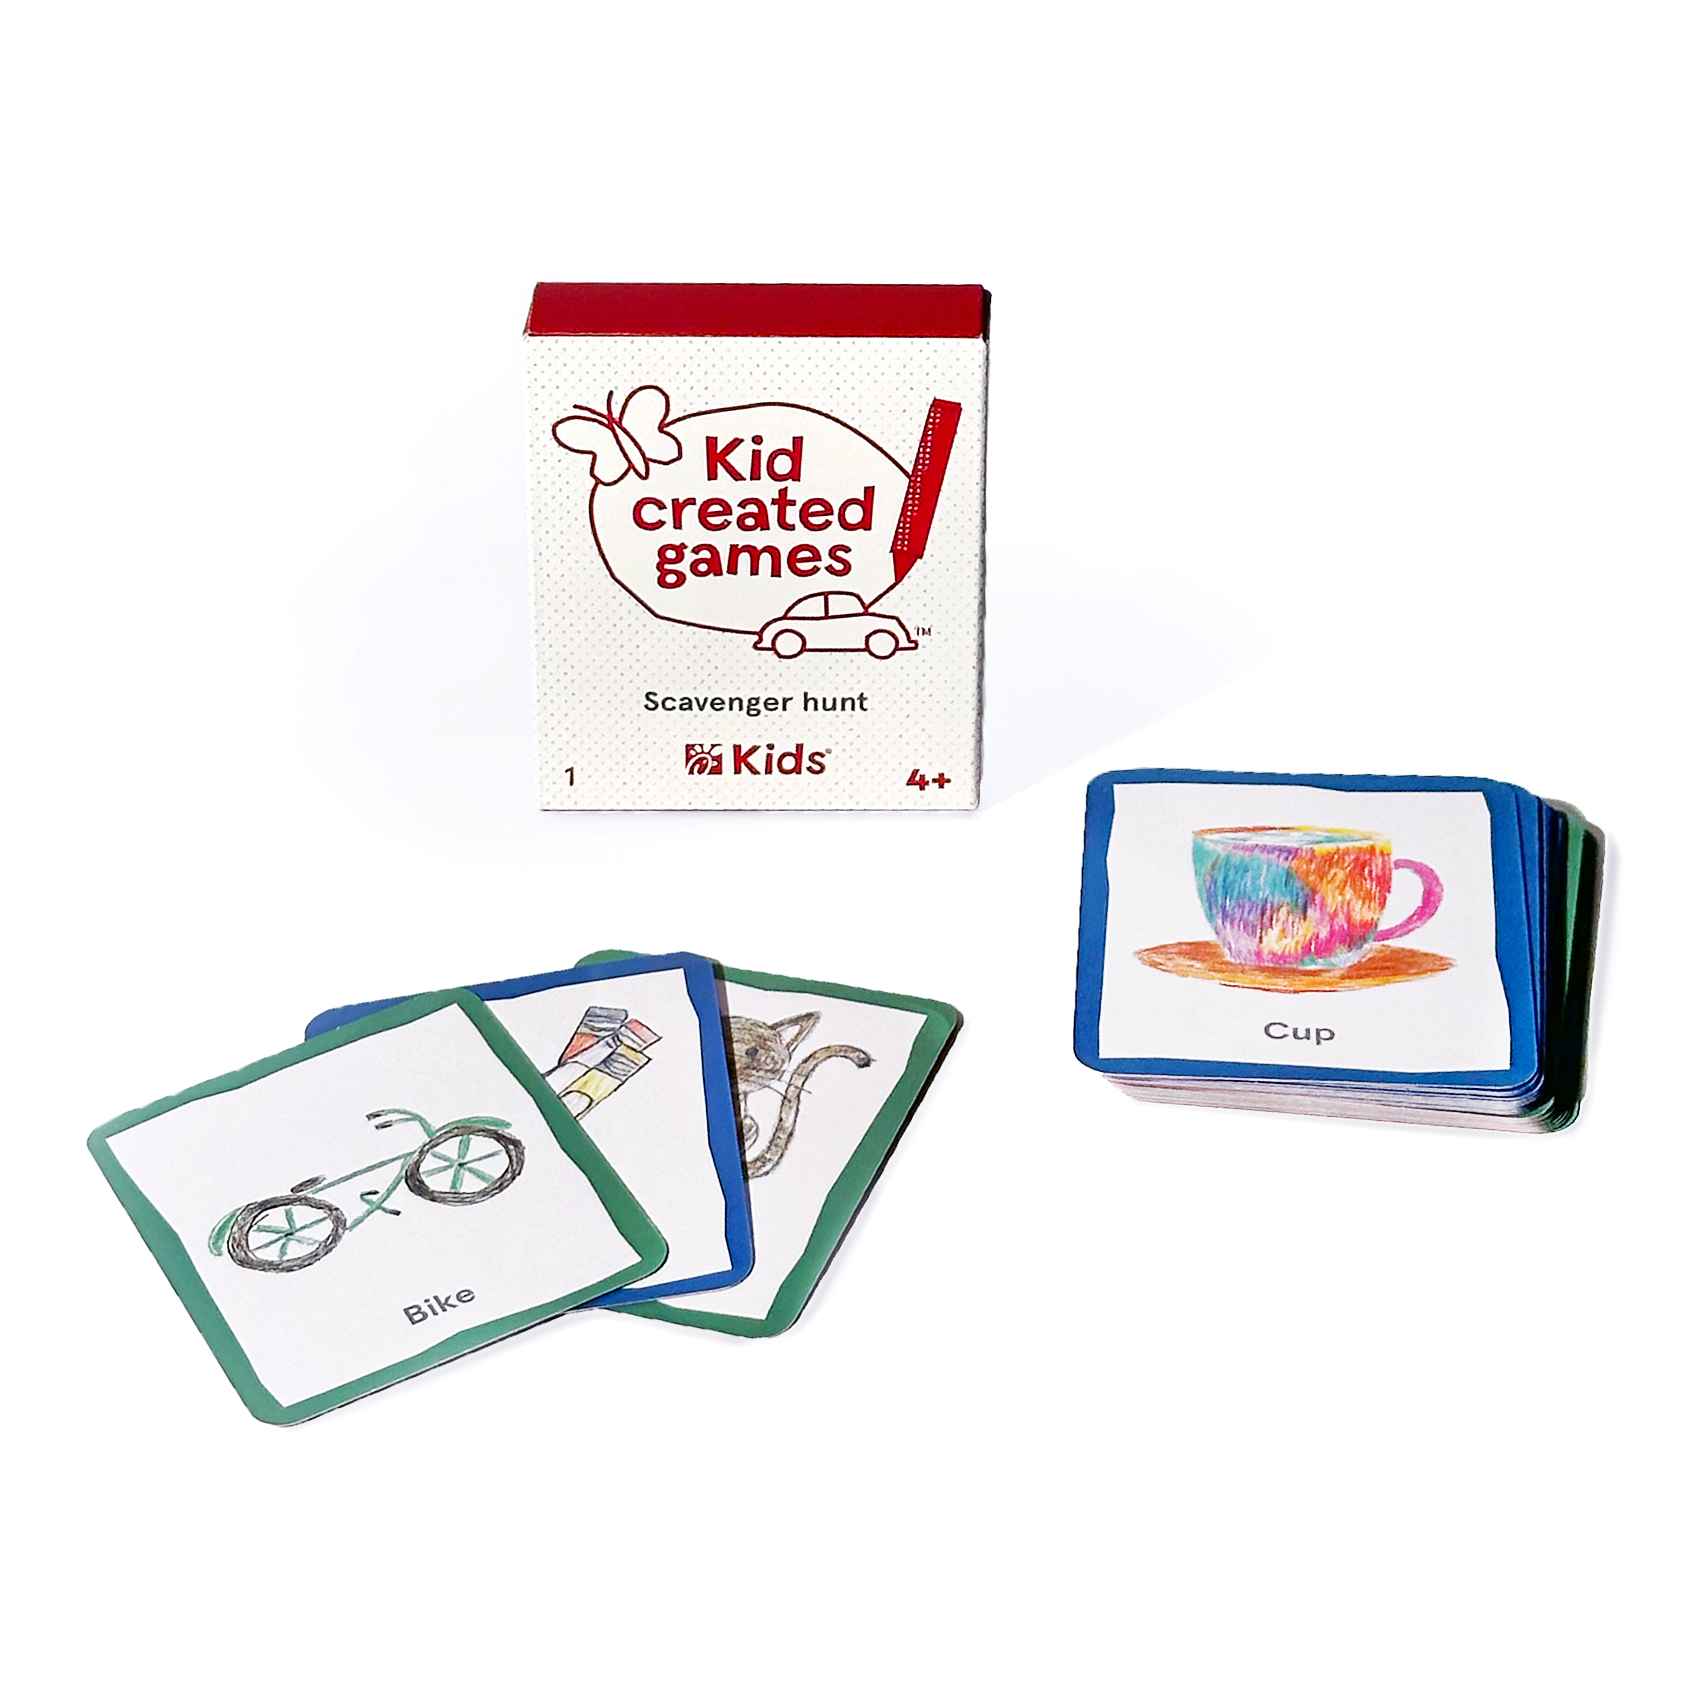 Kid's Meal prize called Scavenger Hunt featuring a deck of cards that a child has colored 